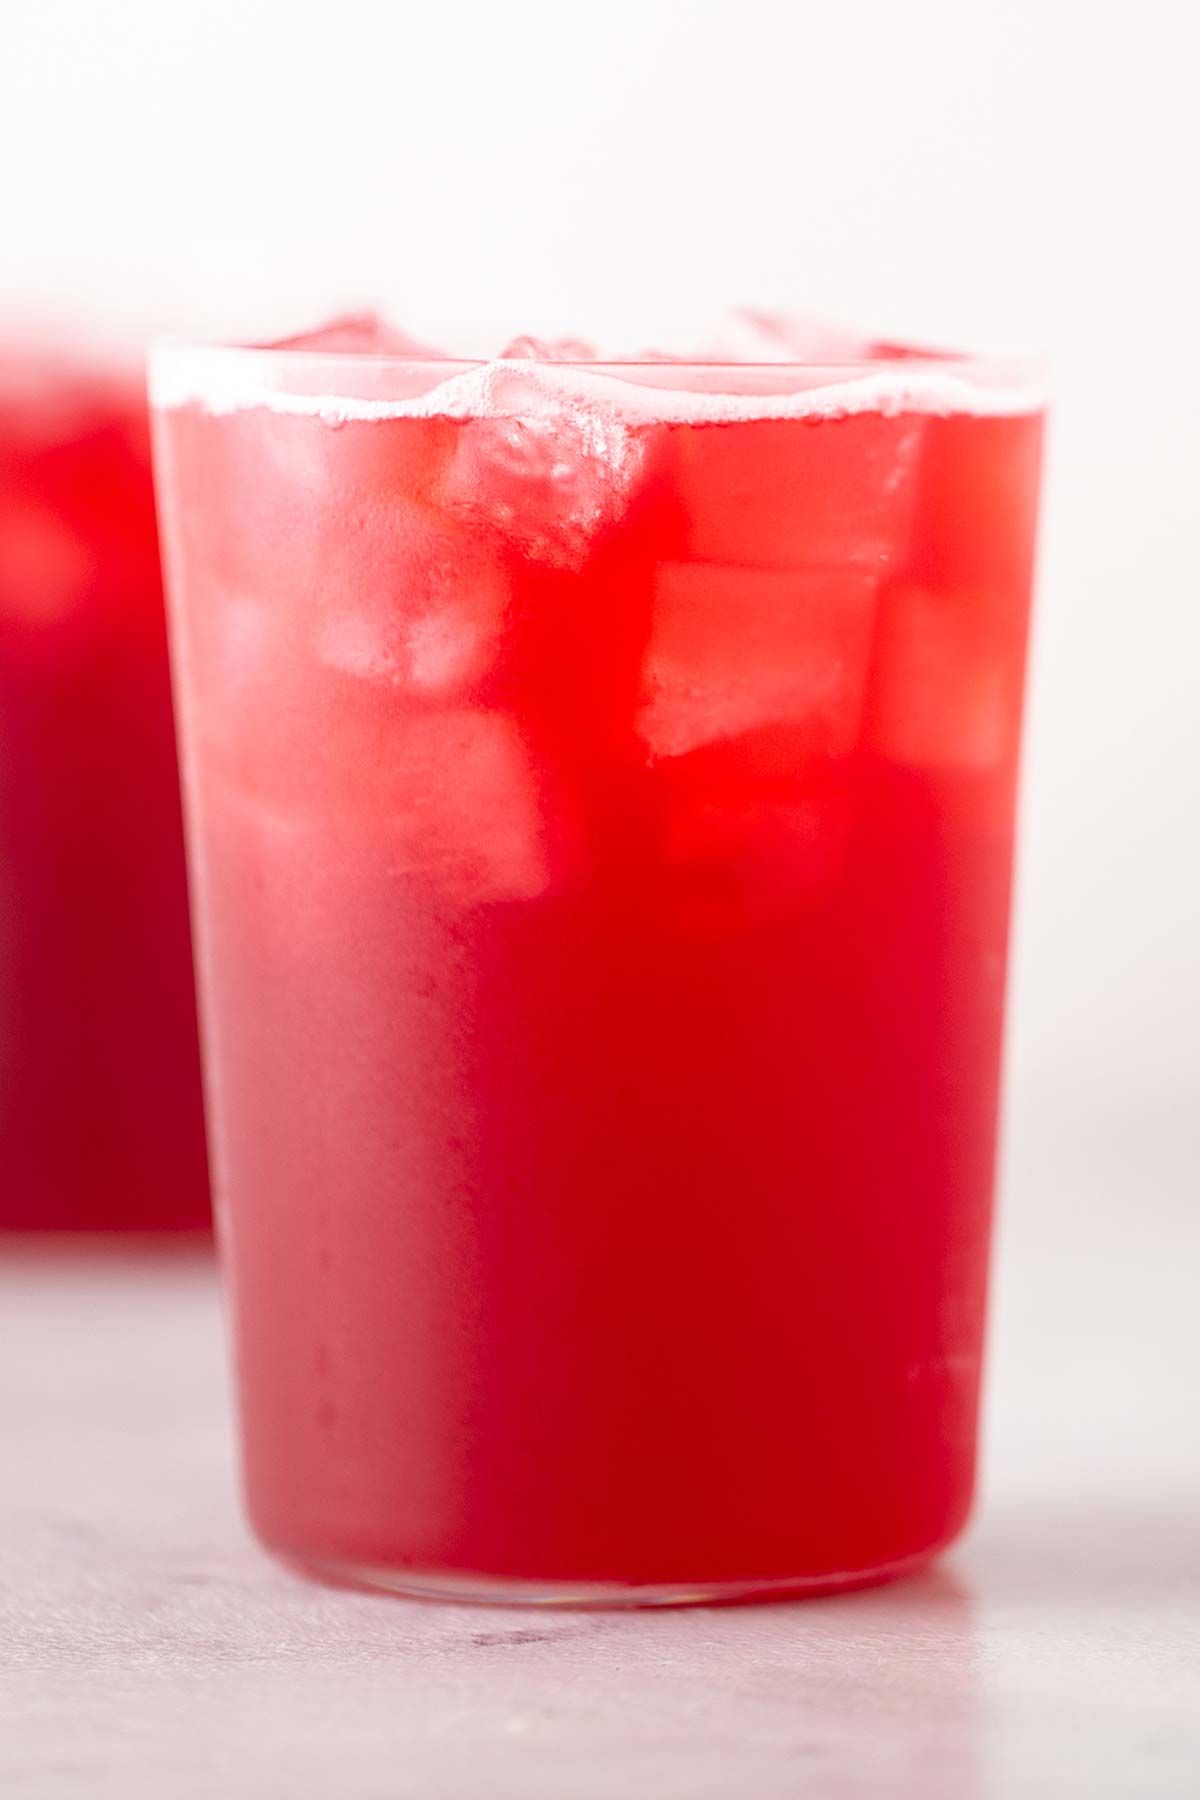 Iced passion tango tea lemonade drink in glass cups.